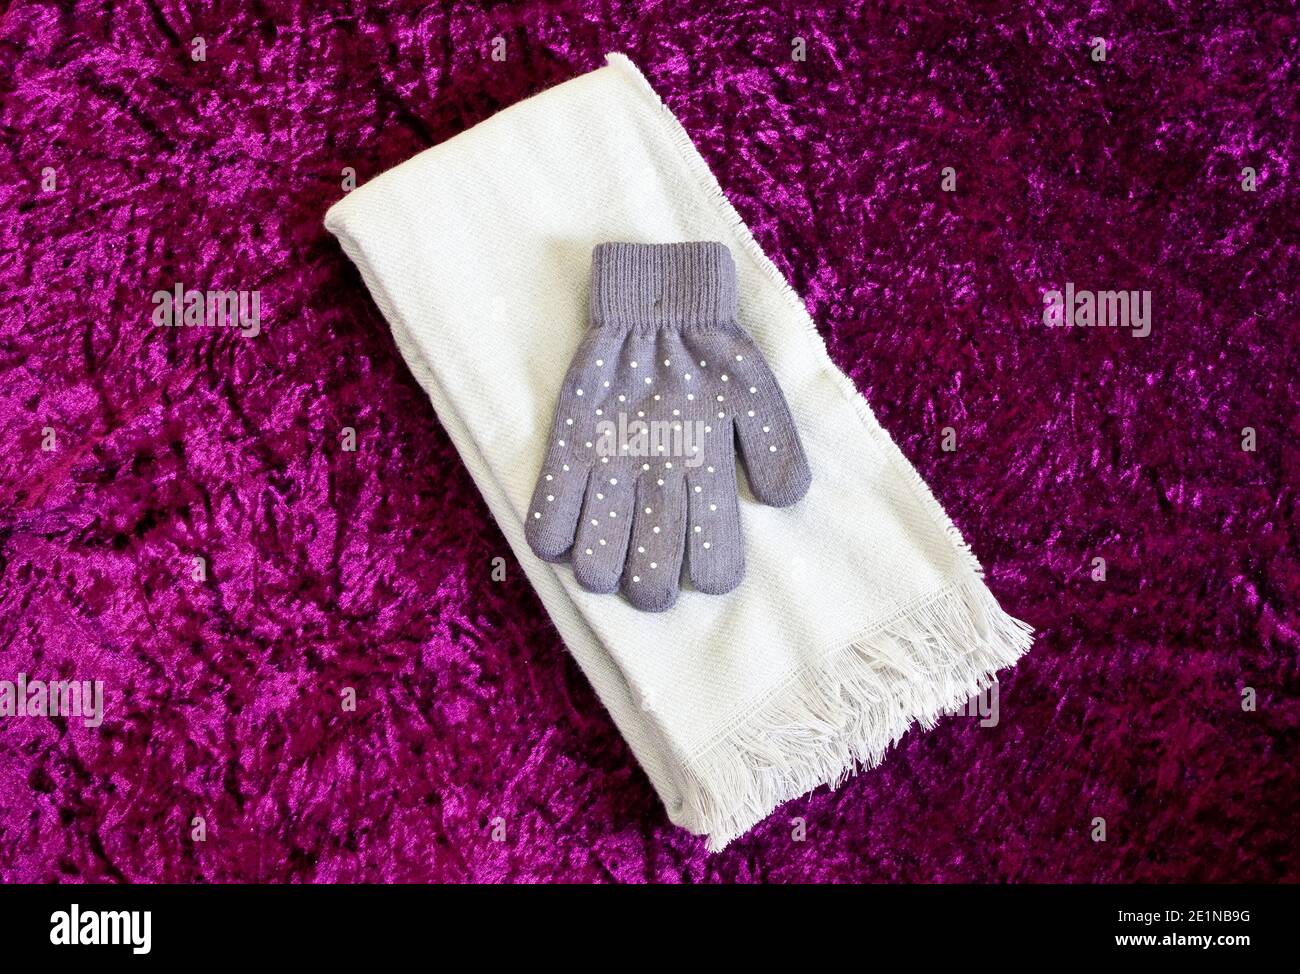 Women's or Ladies Fabric White Scarf and Sequin Grey or Gray Pair of Gloves Stock Photo